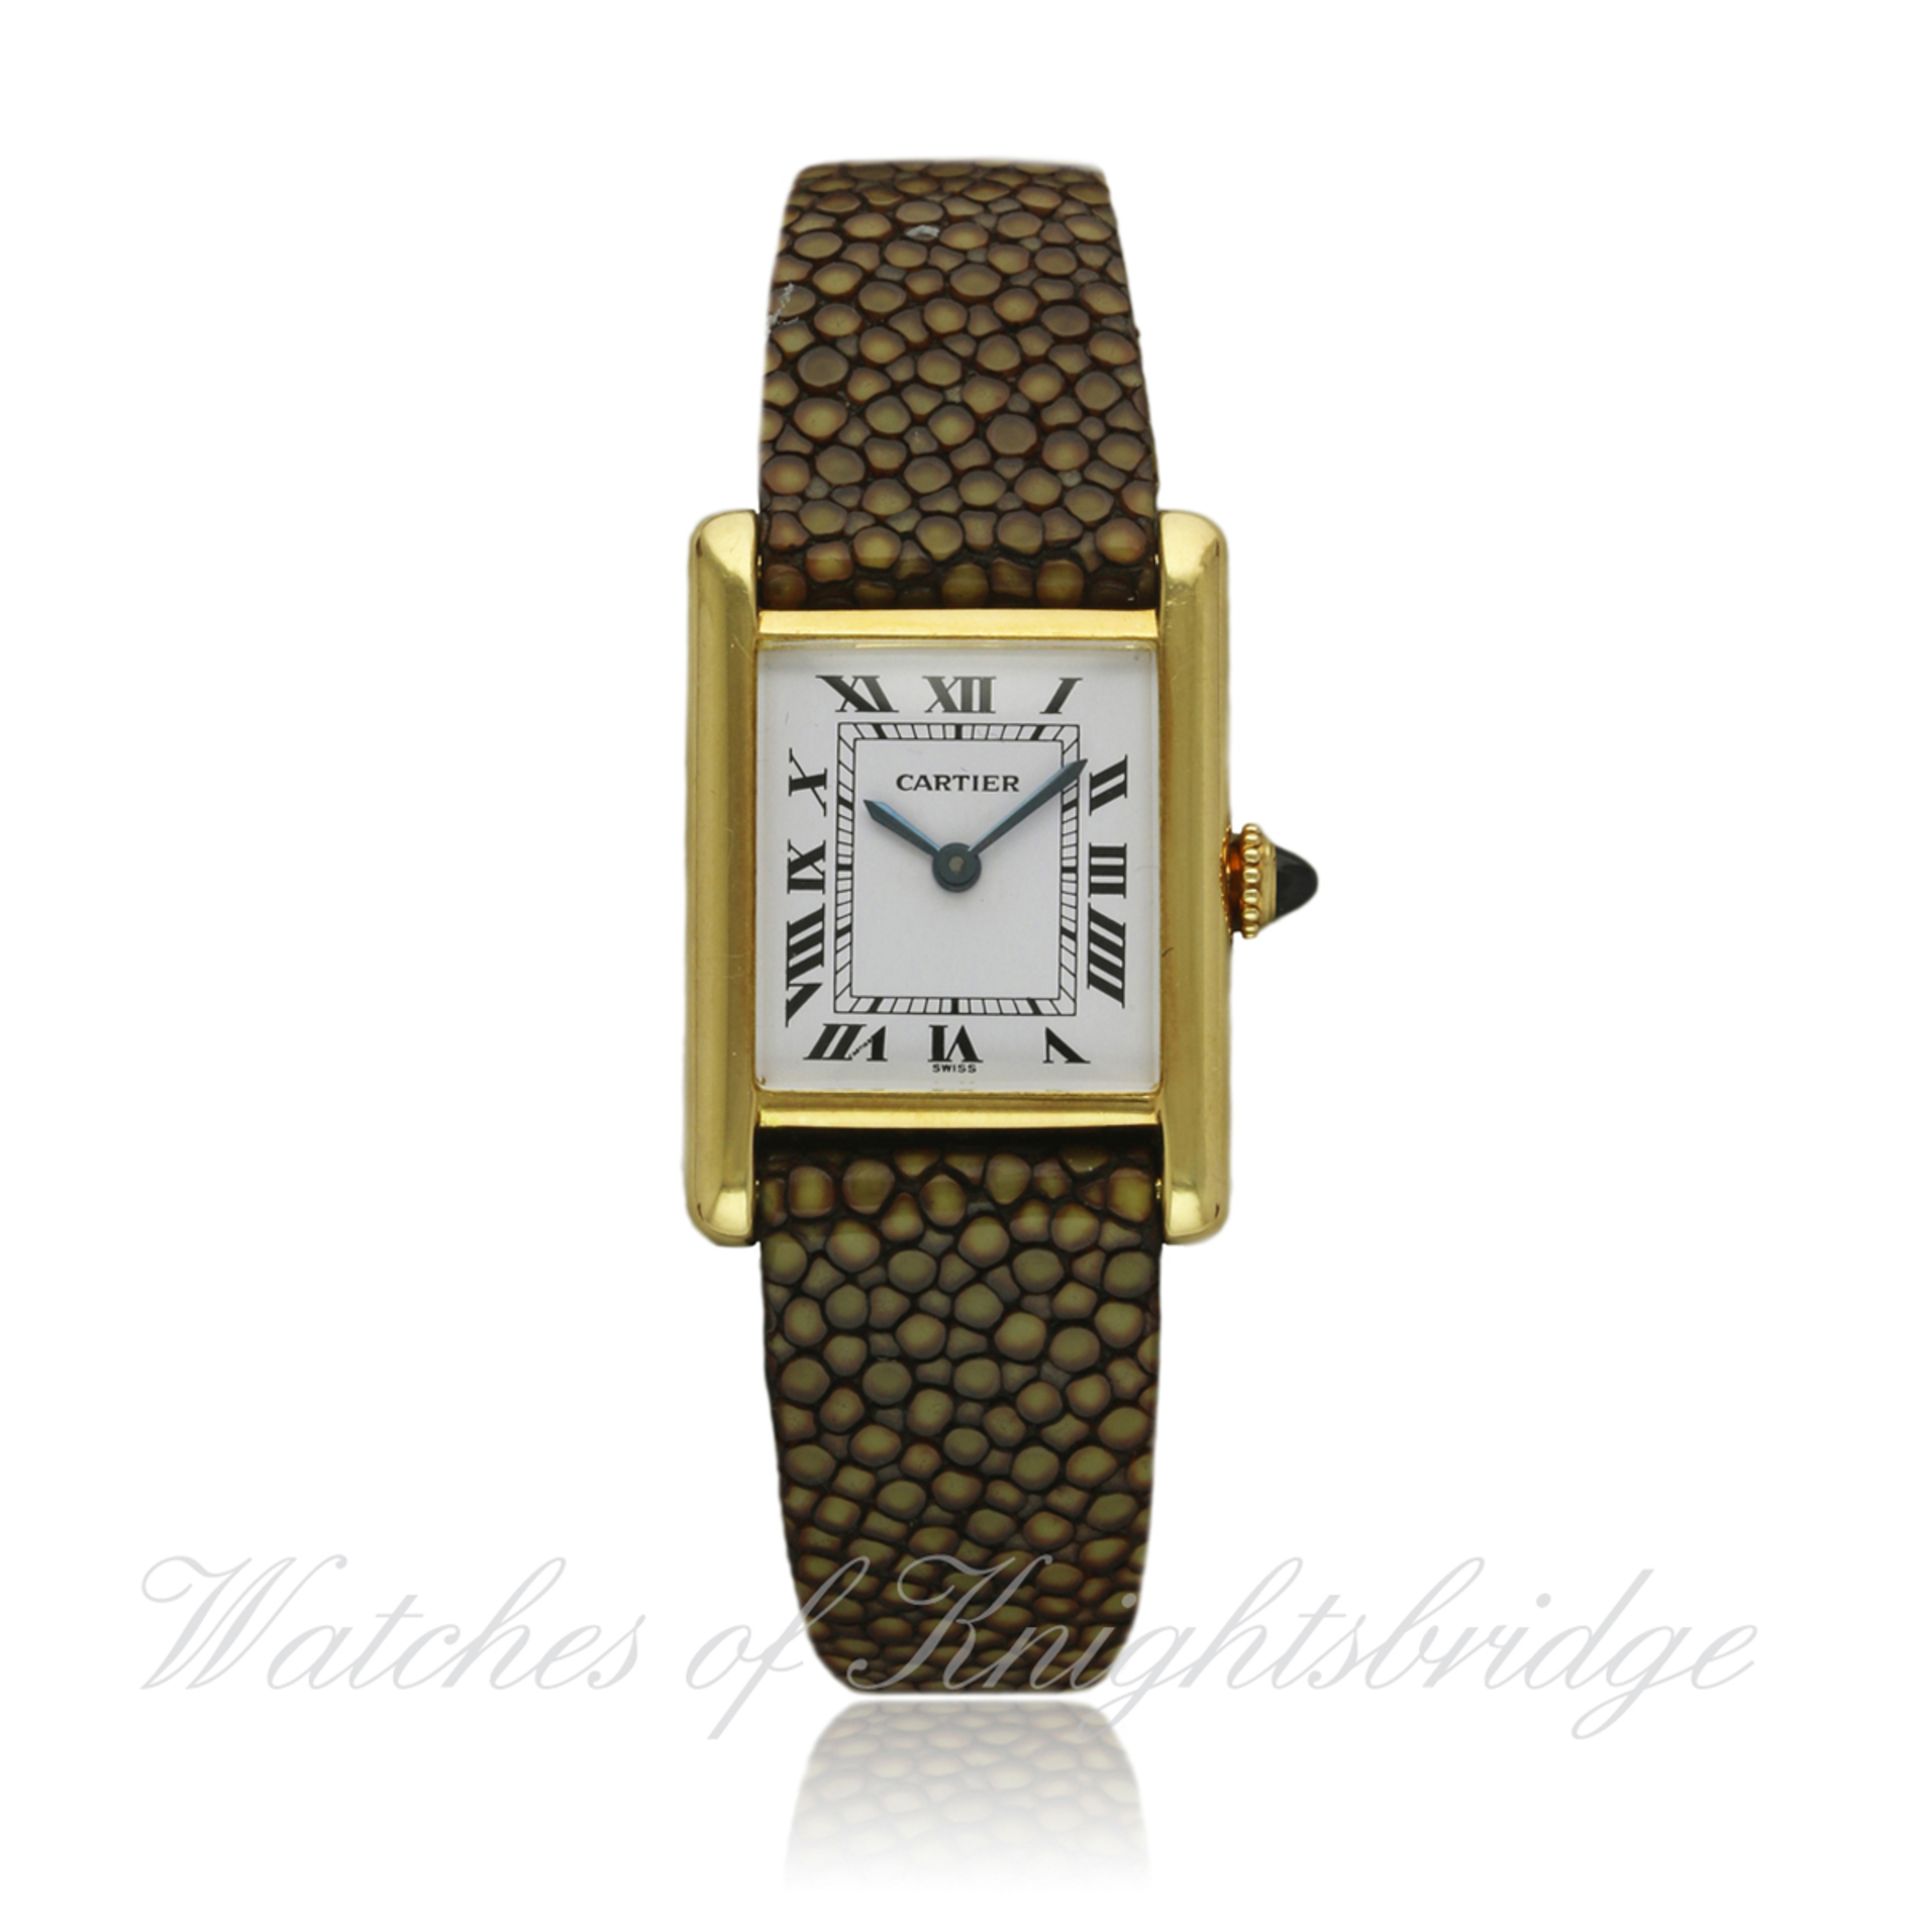 A LADIES 18K SOLID GOLD CARTIER TANK WRIST WATCH CIRCA 1980s D: White dial with Roman numerals &